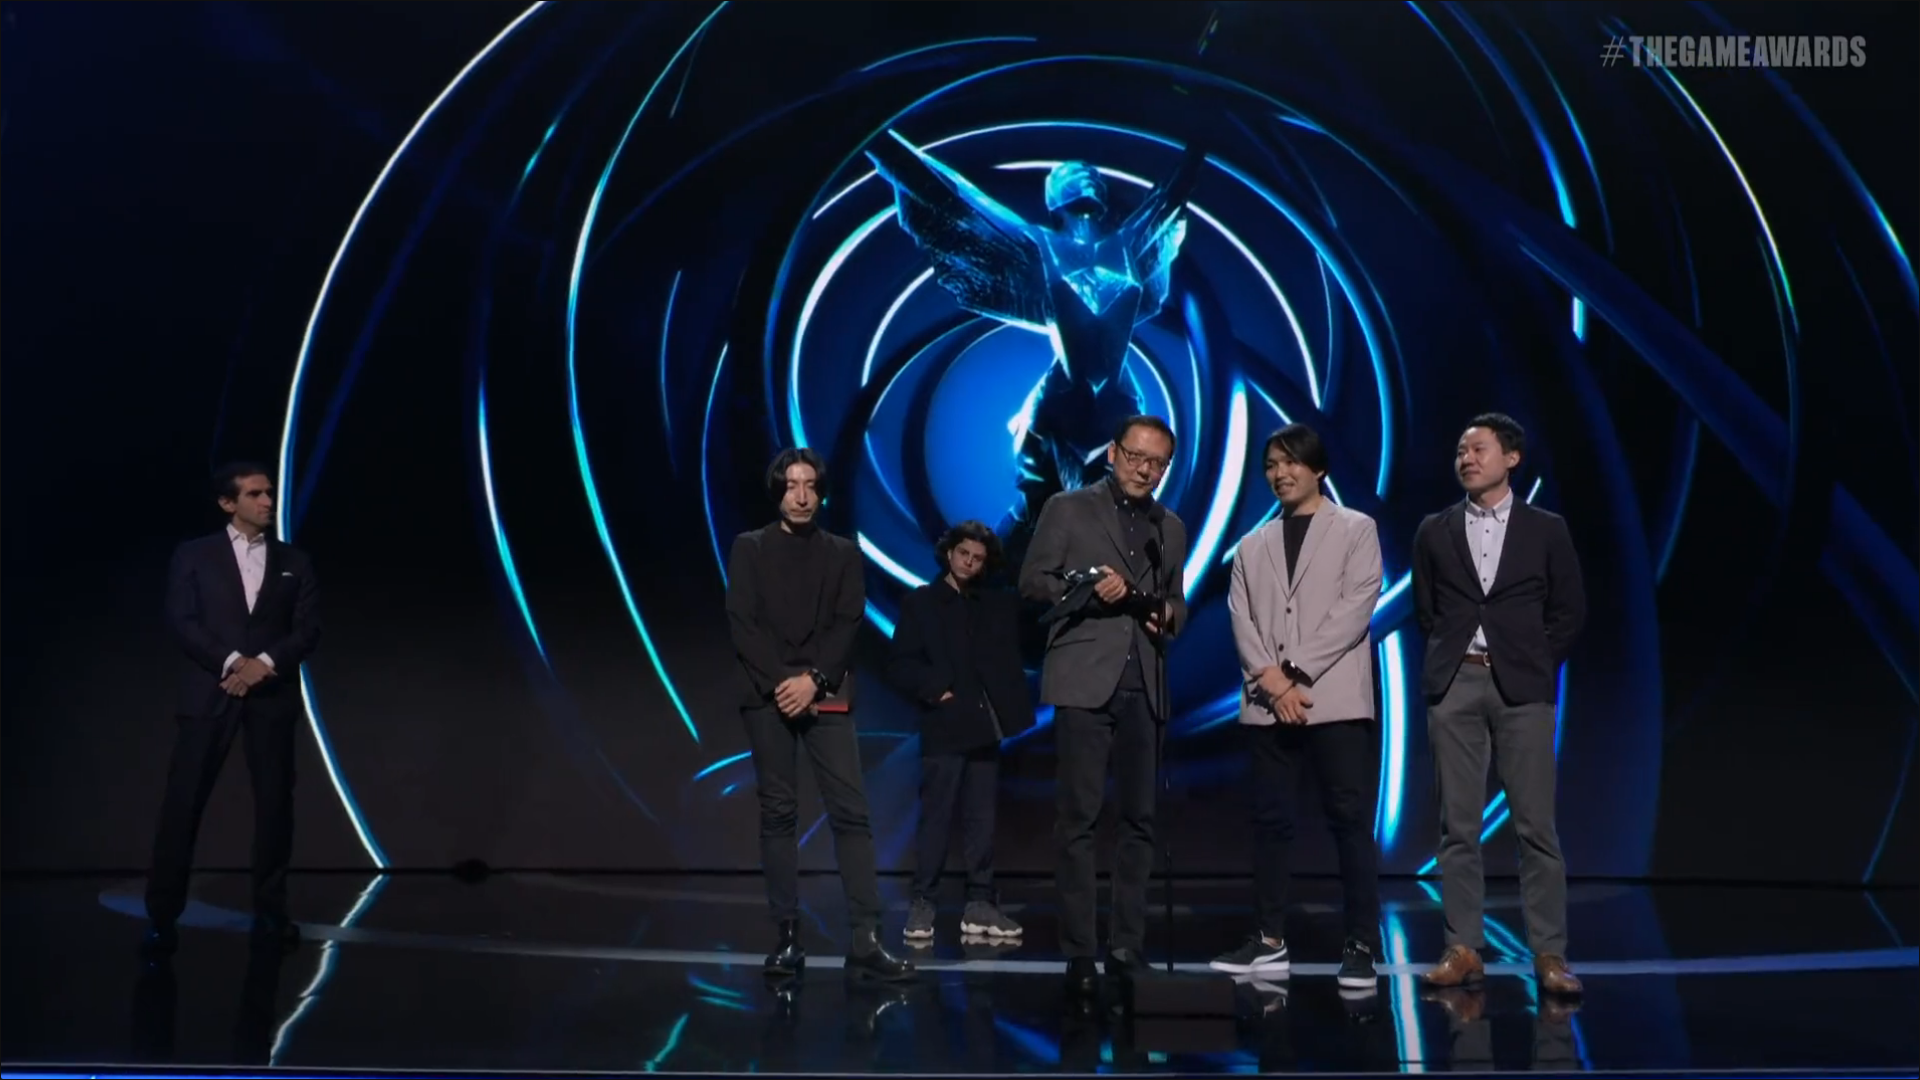 The game awards: intruder's death is indicted on stage, and quotes Bill  Clinton, the GOTY is destroyed - Game News 24